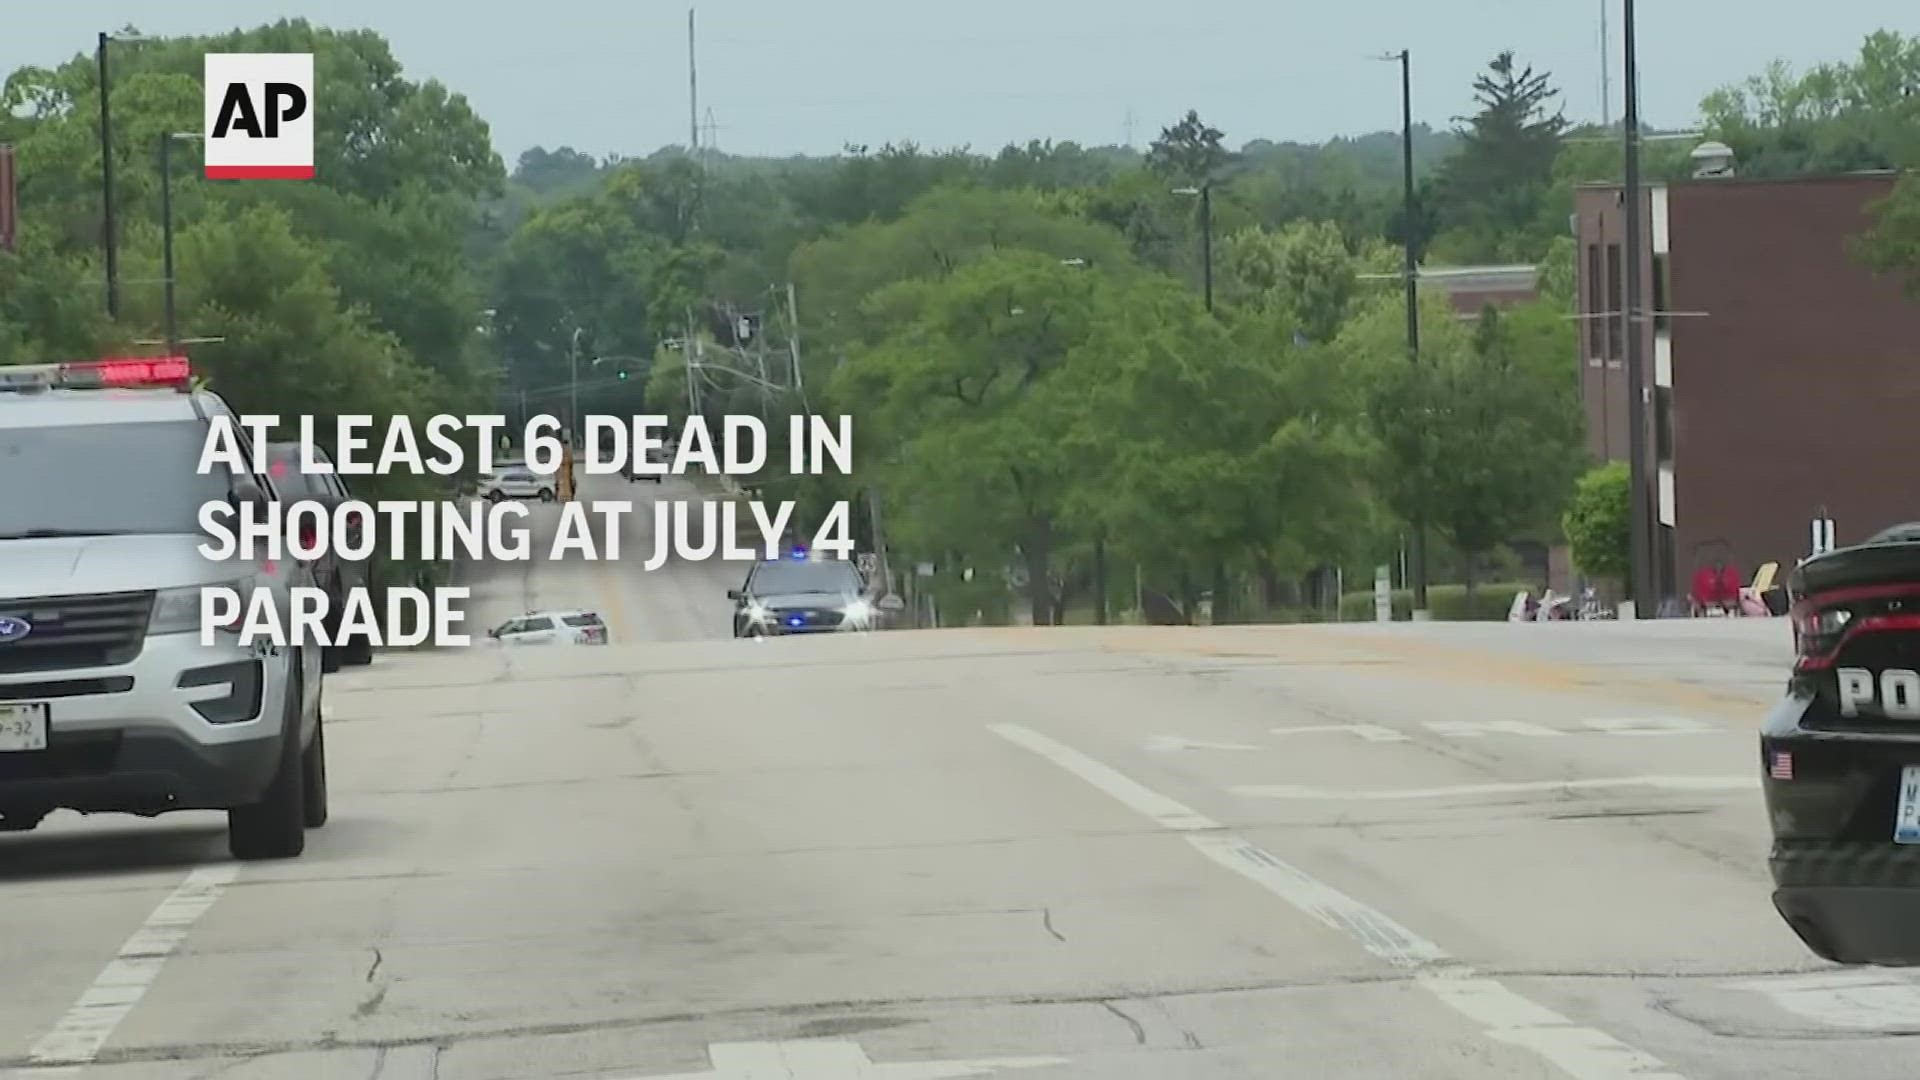 Police say at least six people are dead and 24 were wounded in a shooting at a July Fourth parade in a Chicago suburb.